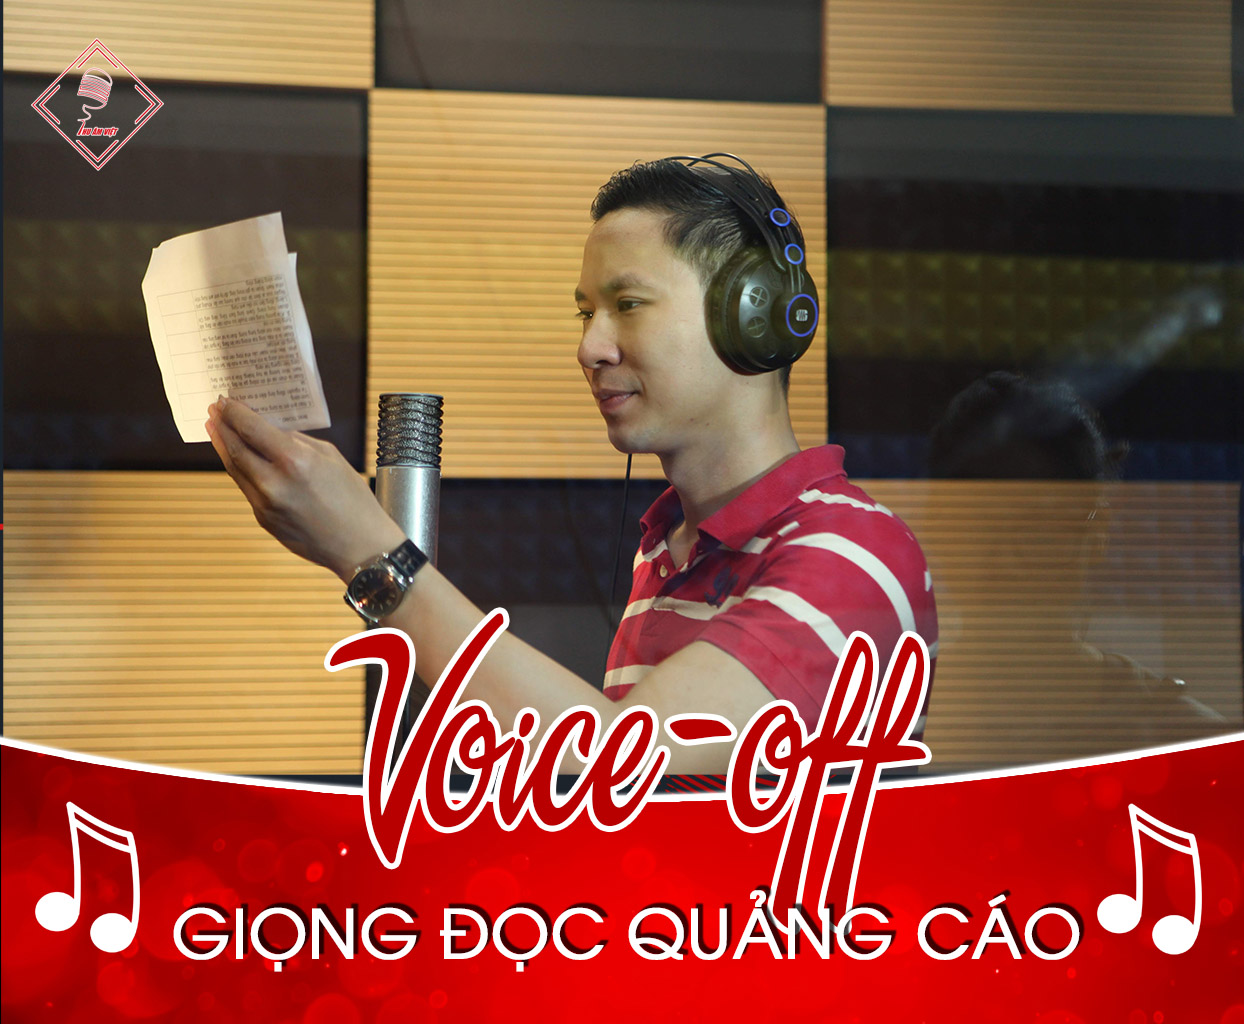 voice%20off%20giong%20doc%20quang%20cao